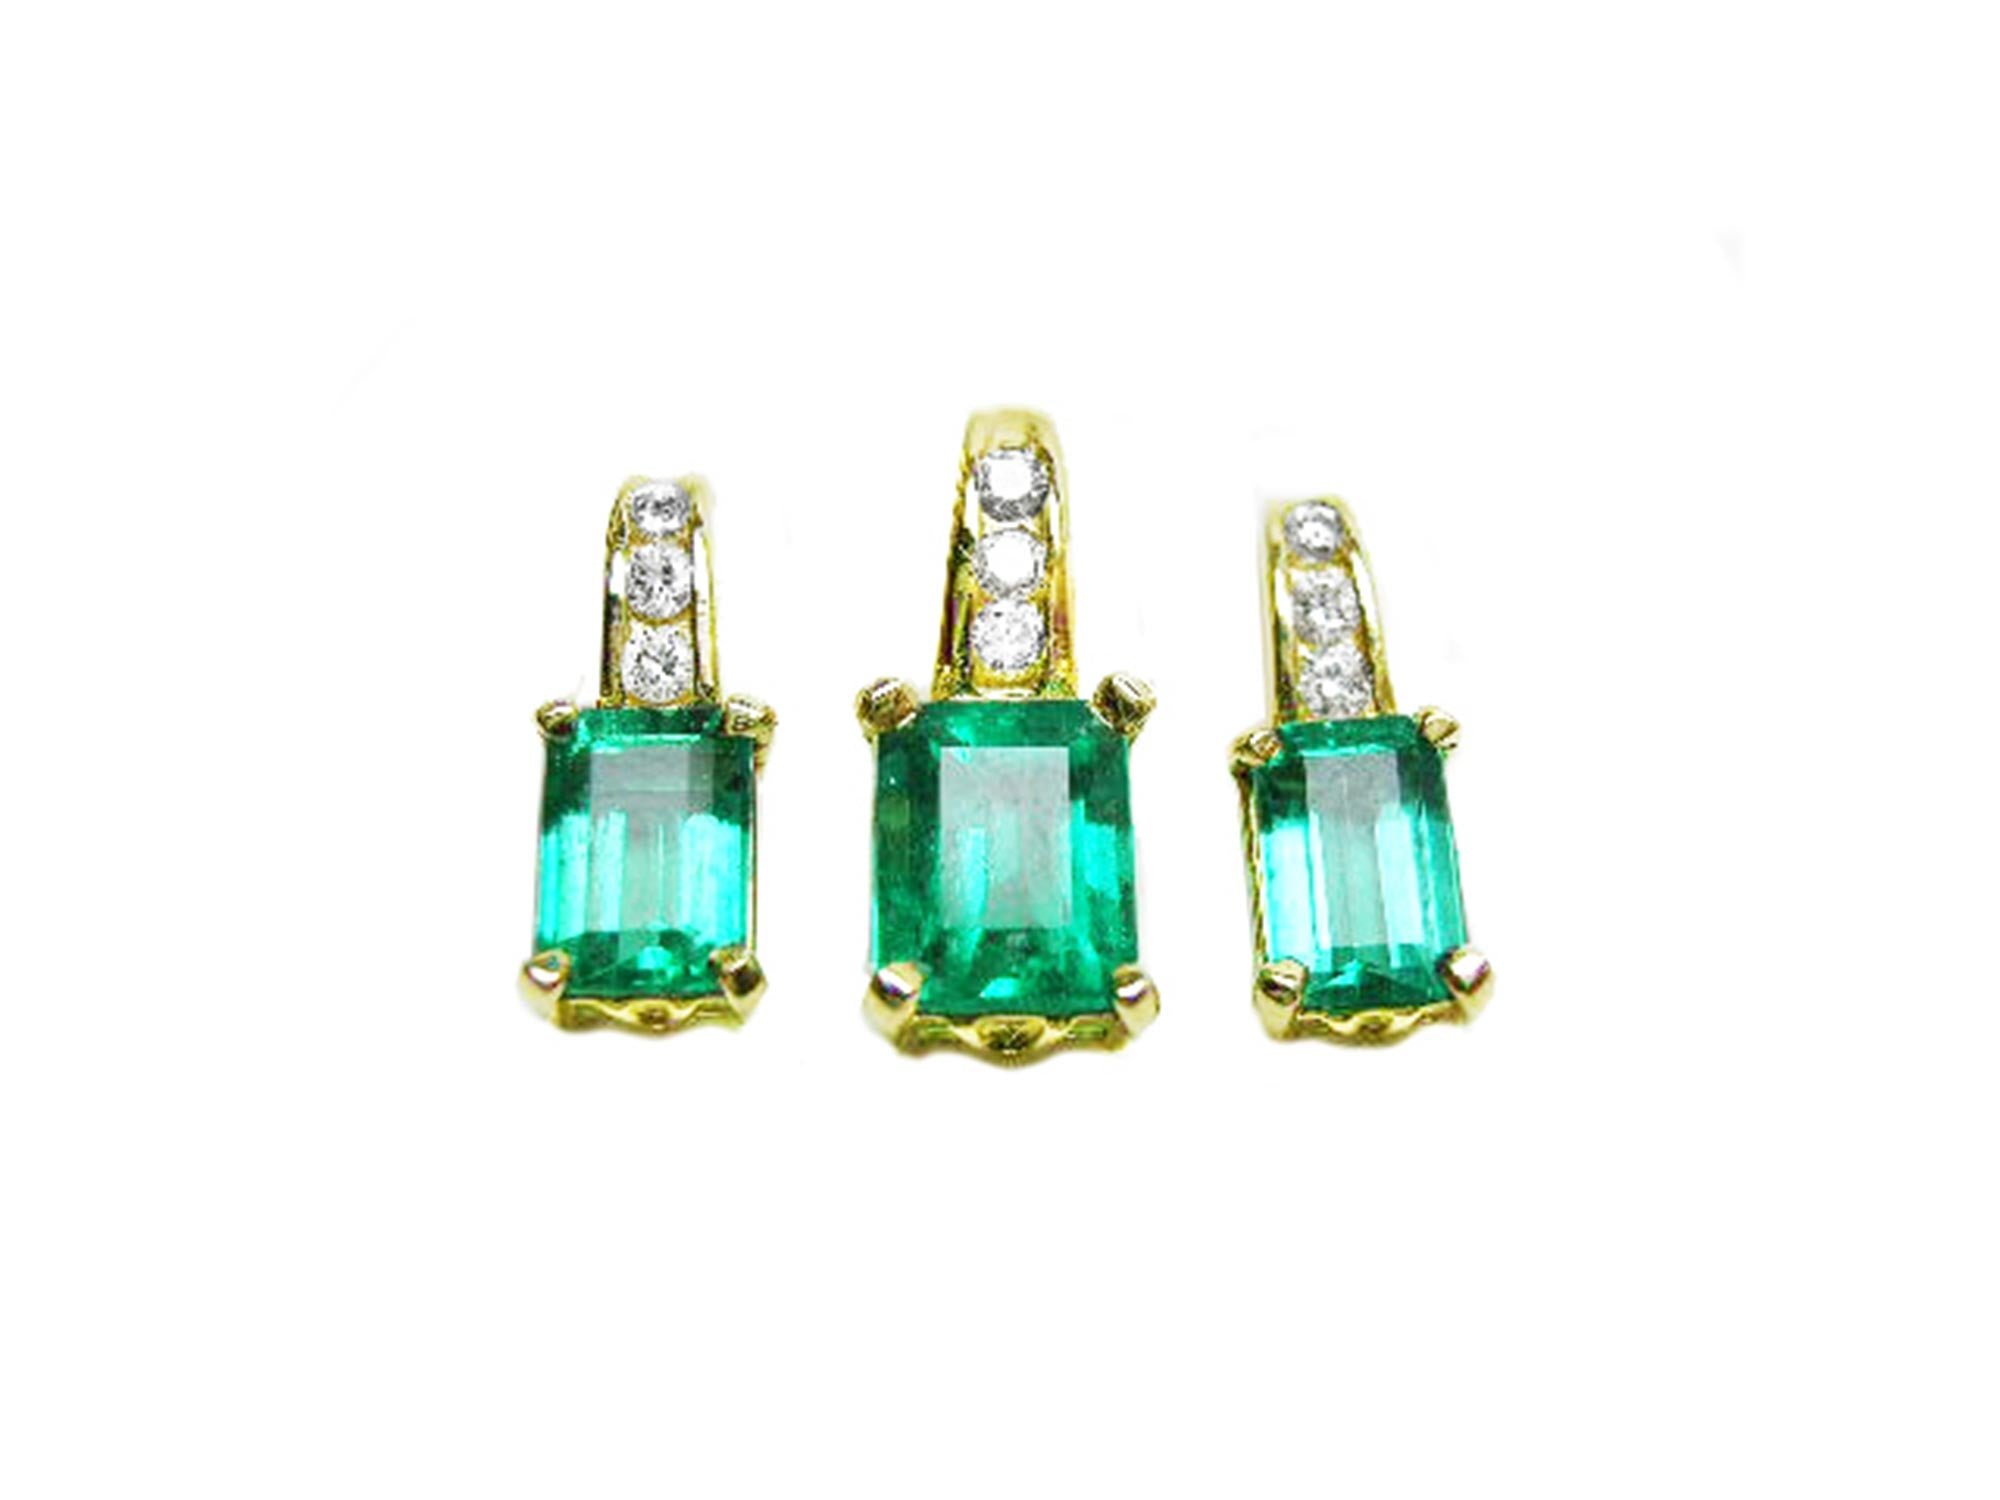 Real emerald earrings and pendant